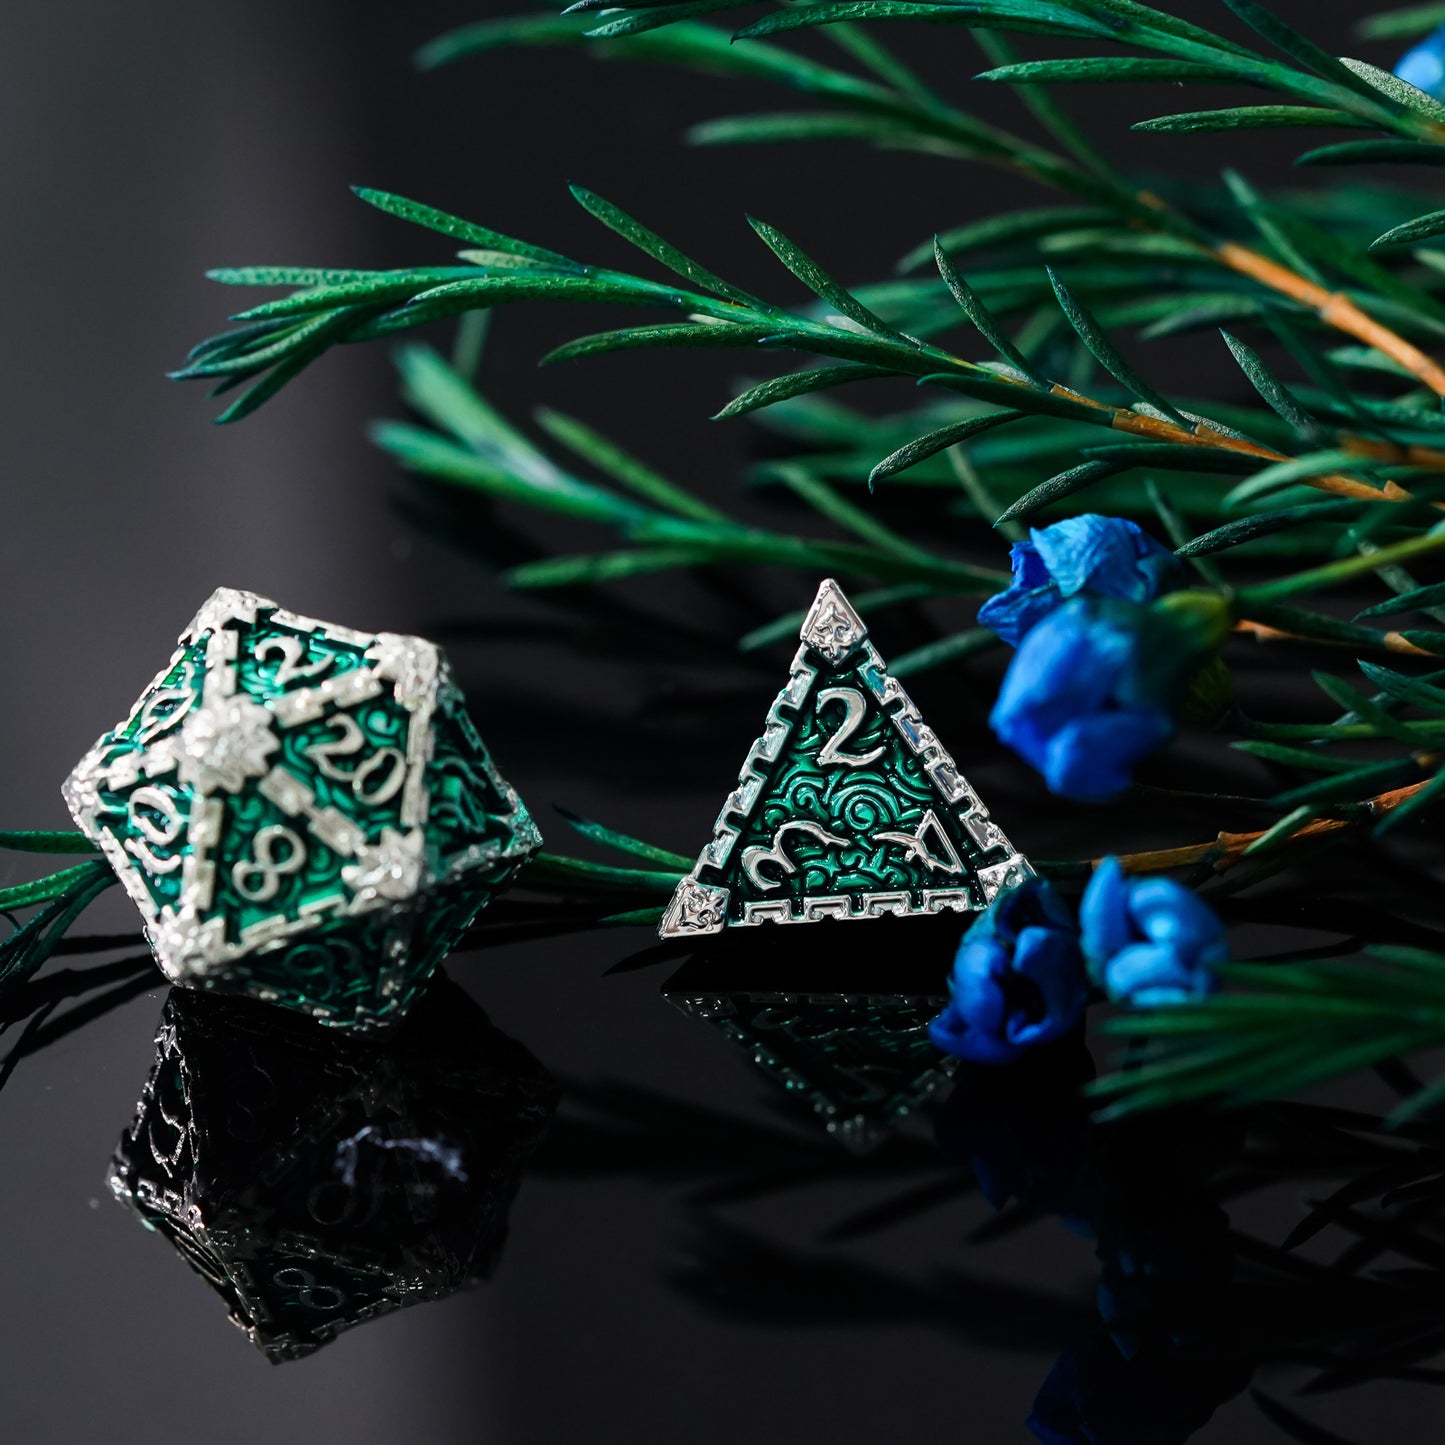 D20 and d4 with rosemary in background